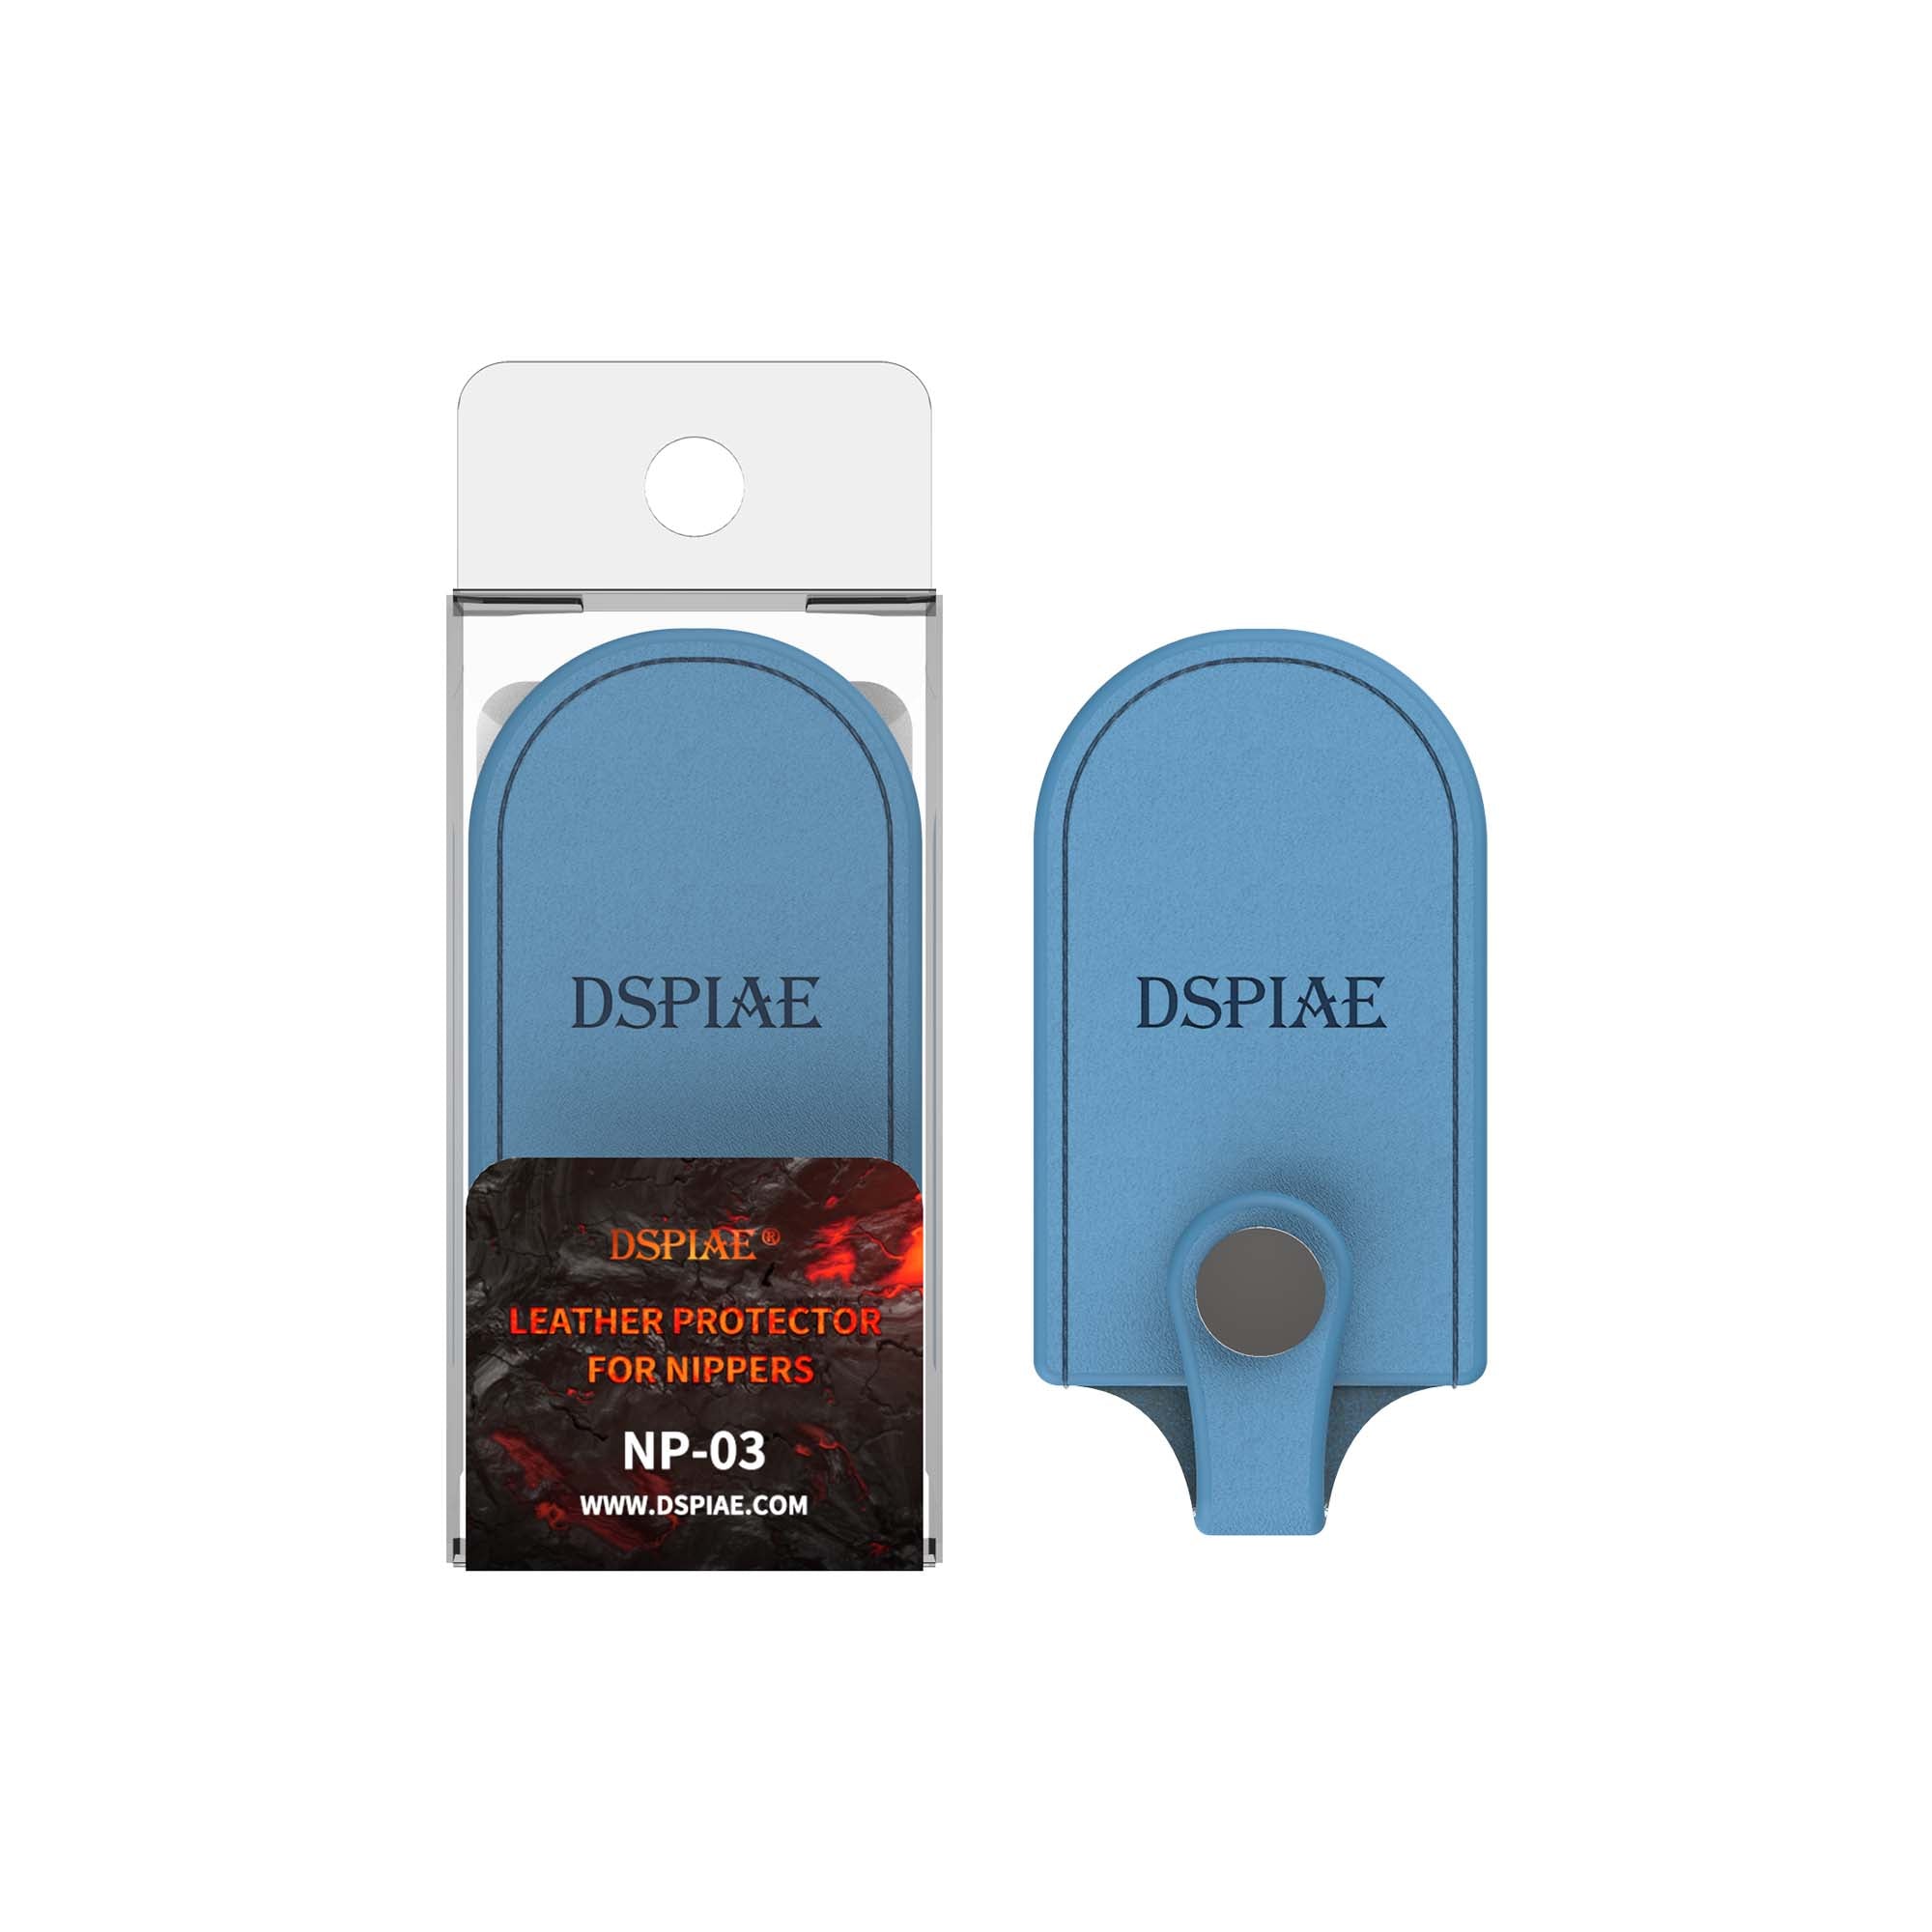 DSPIAE - Leather Protector For Nippers